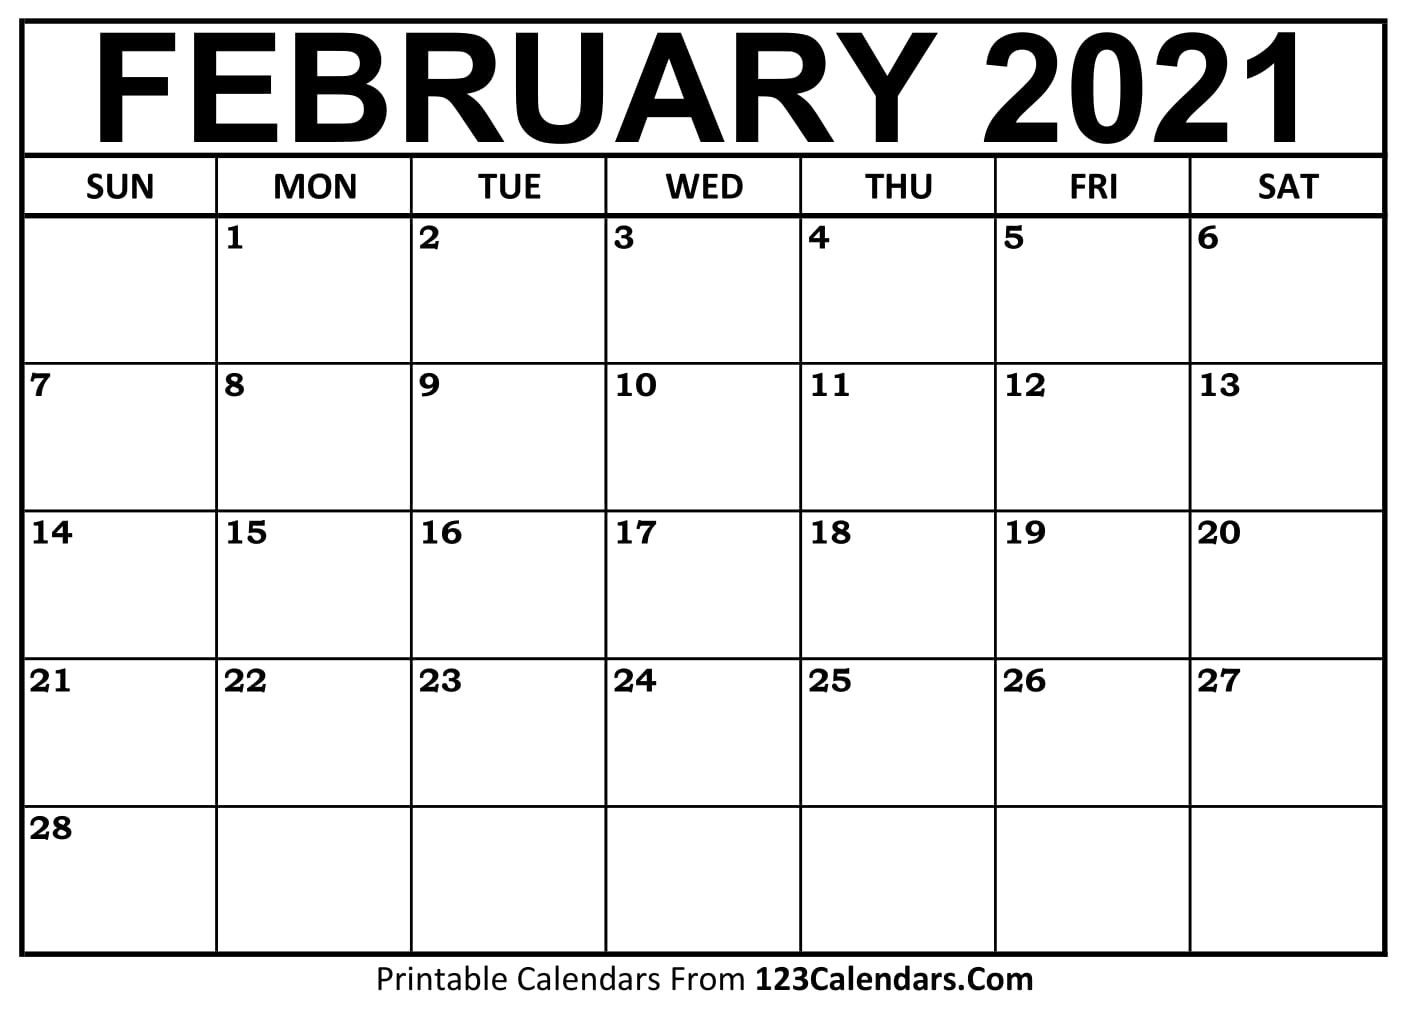 print free 2021 calendar without downloading weekly